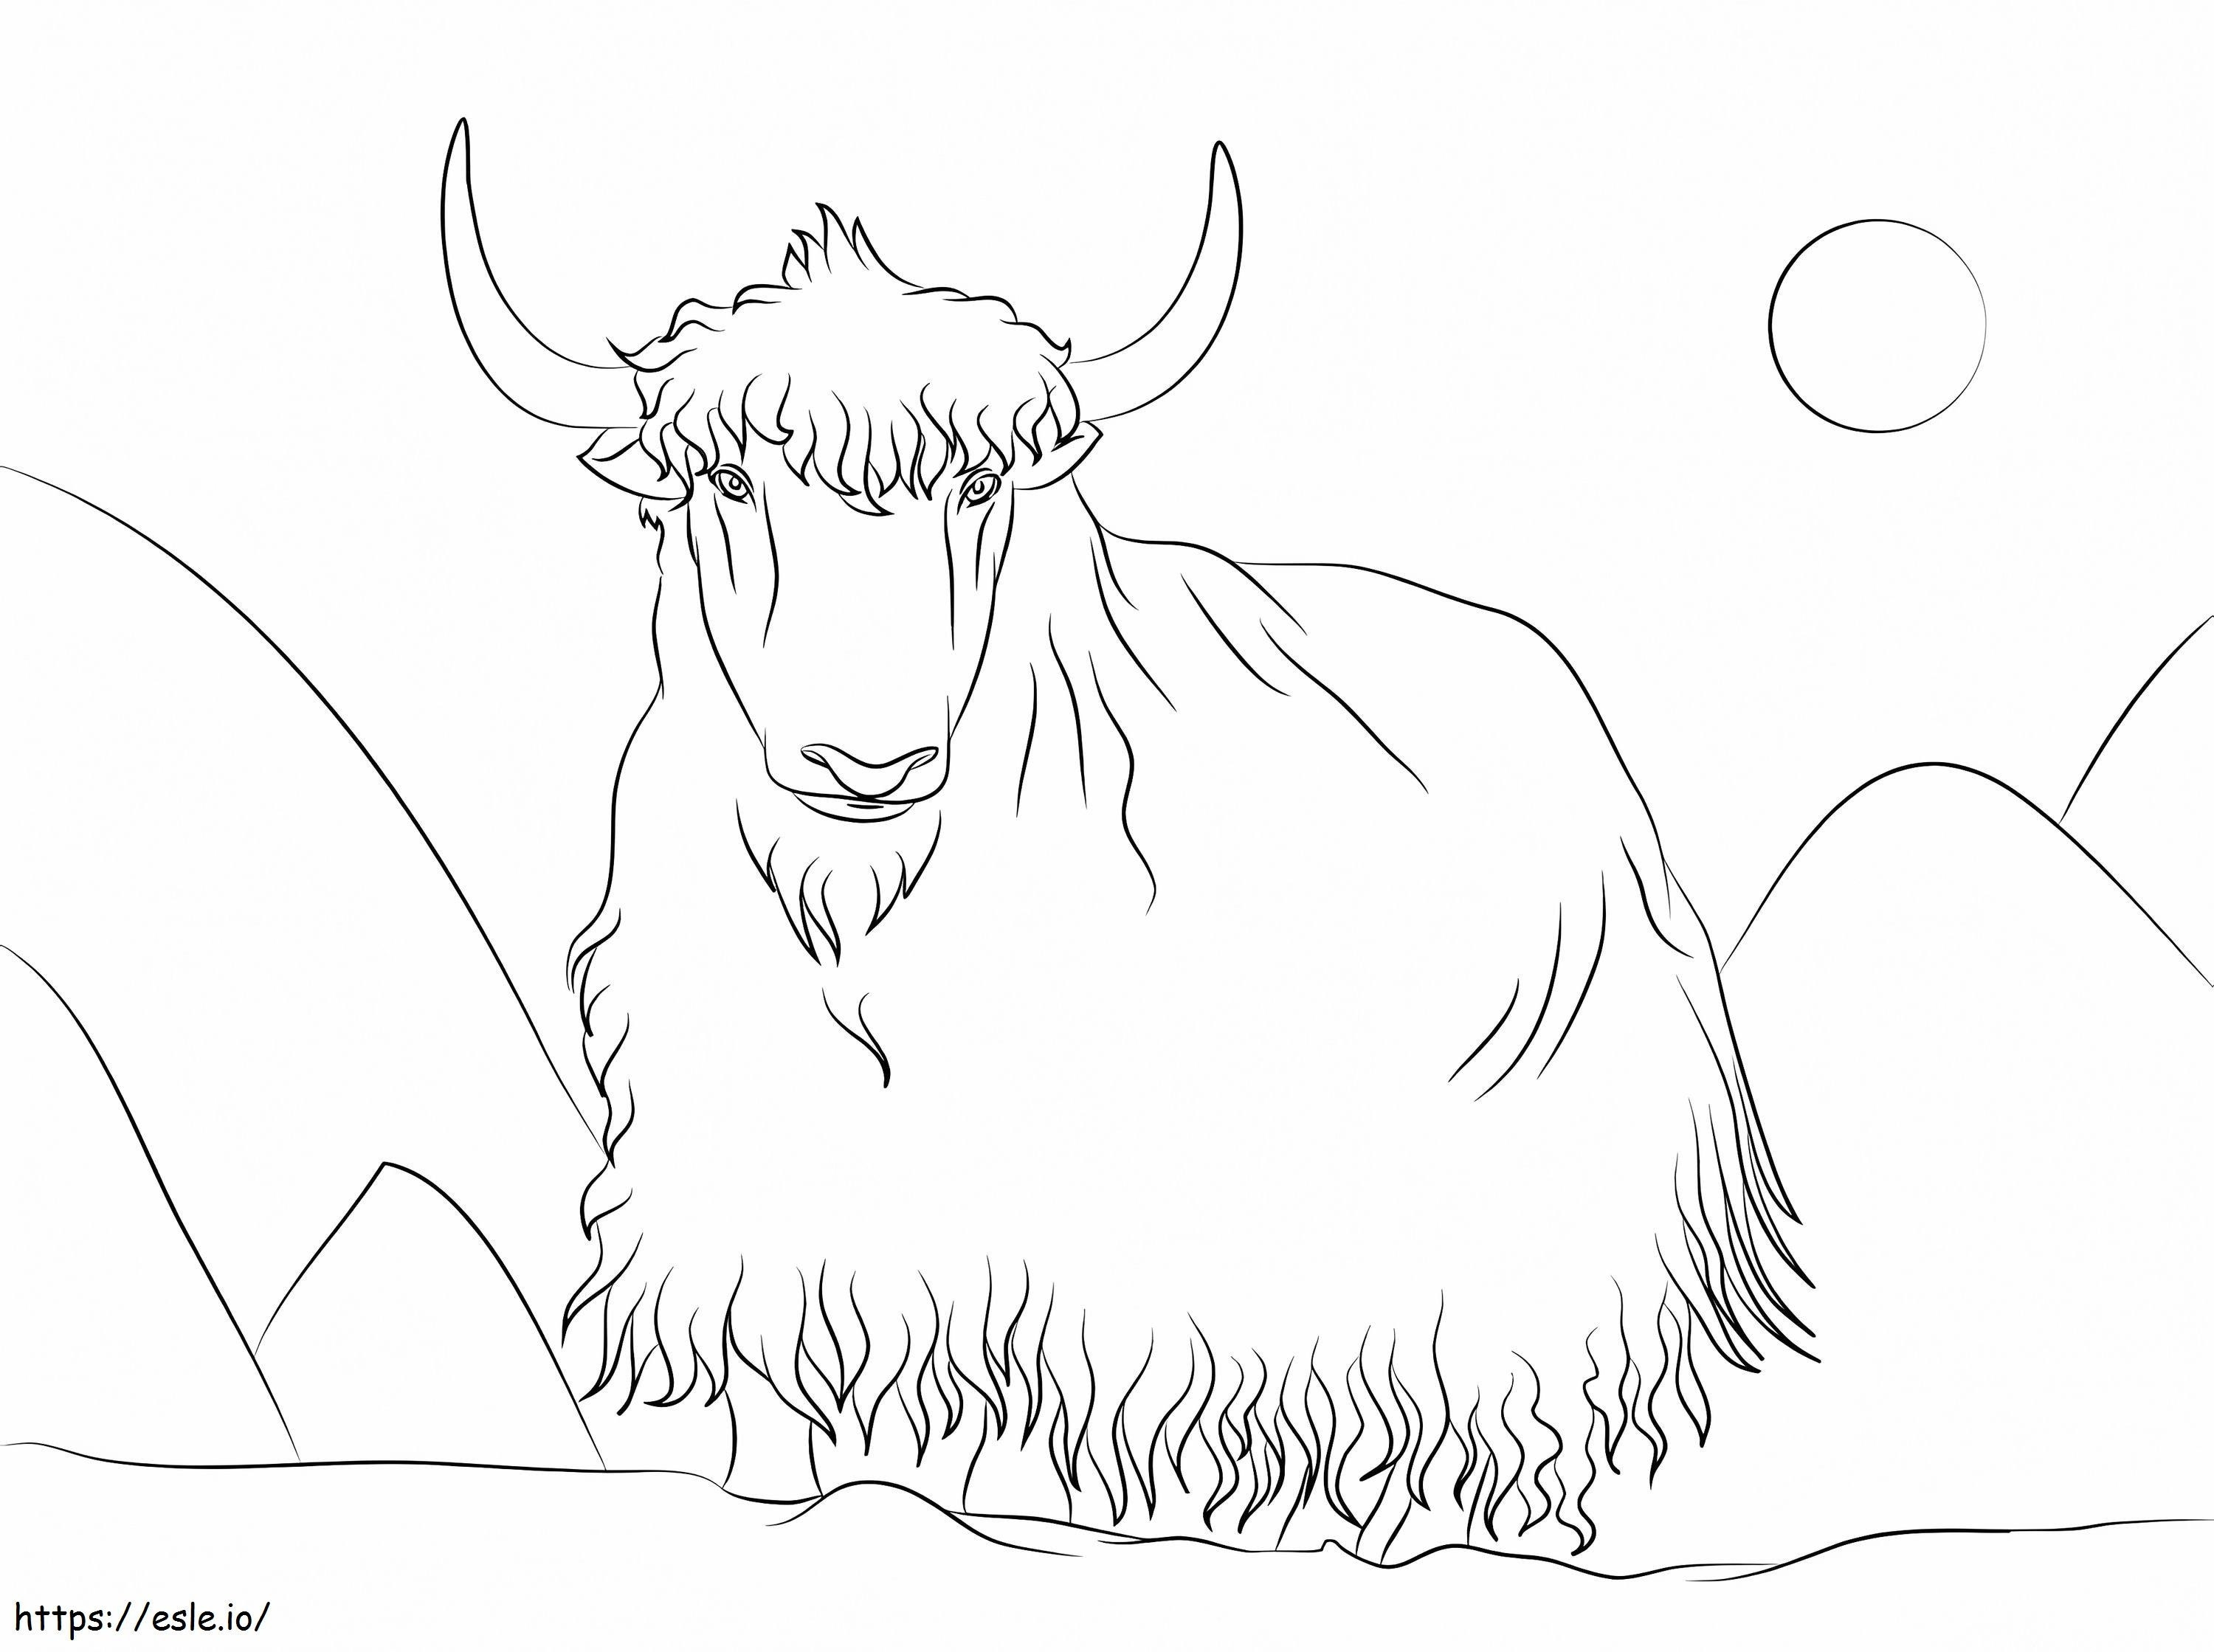 Yak 1 coloring page